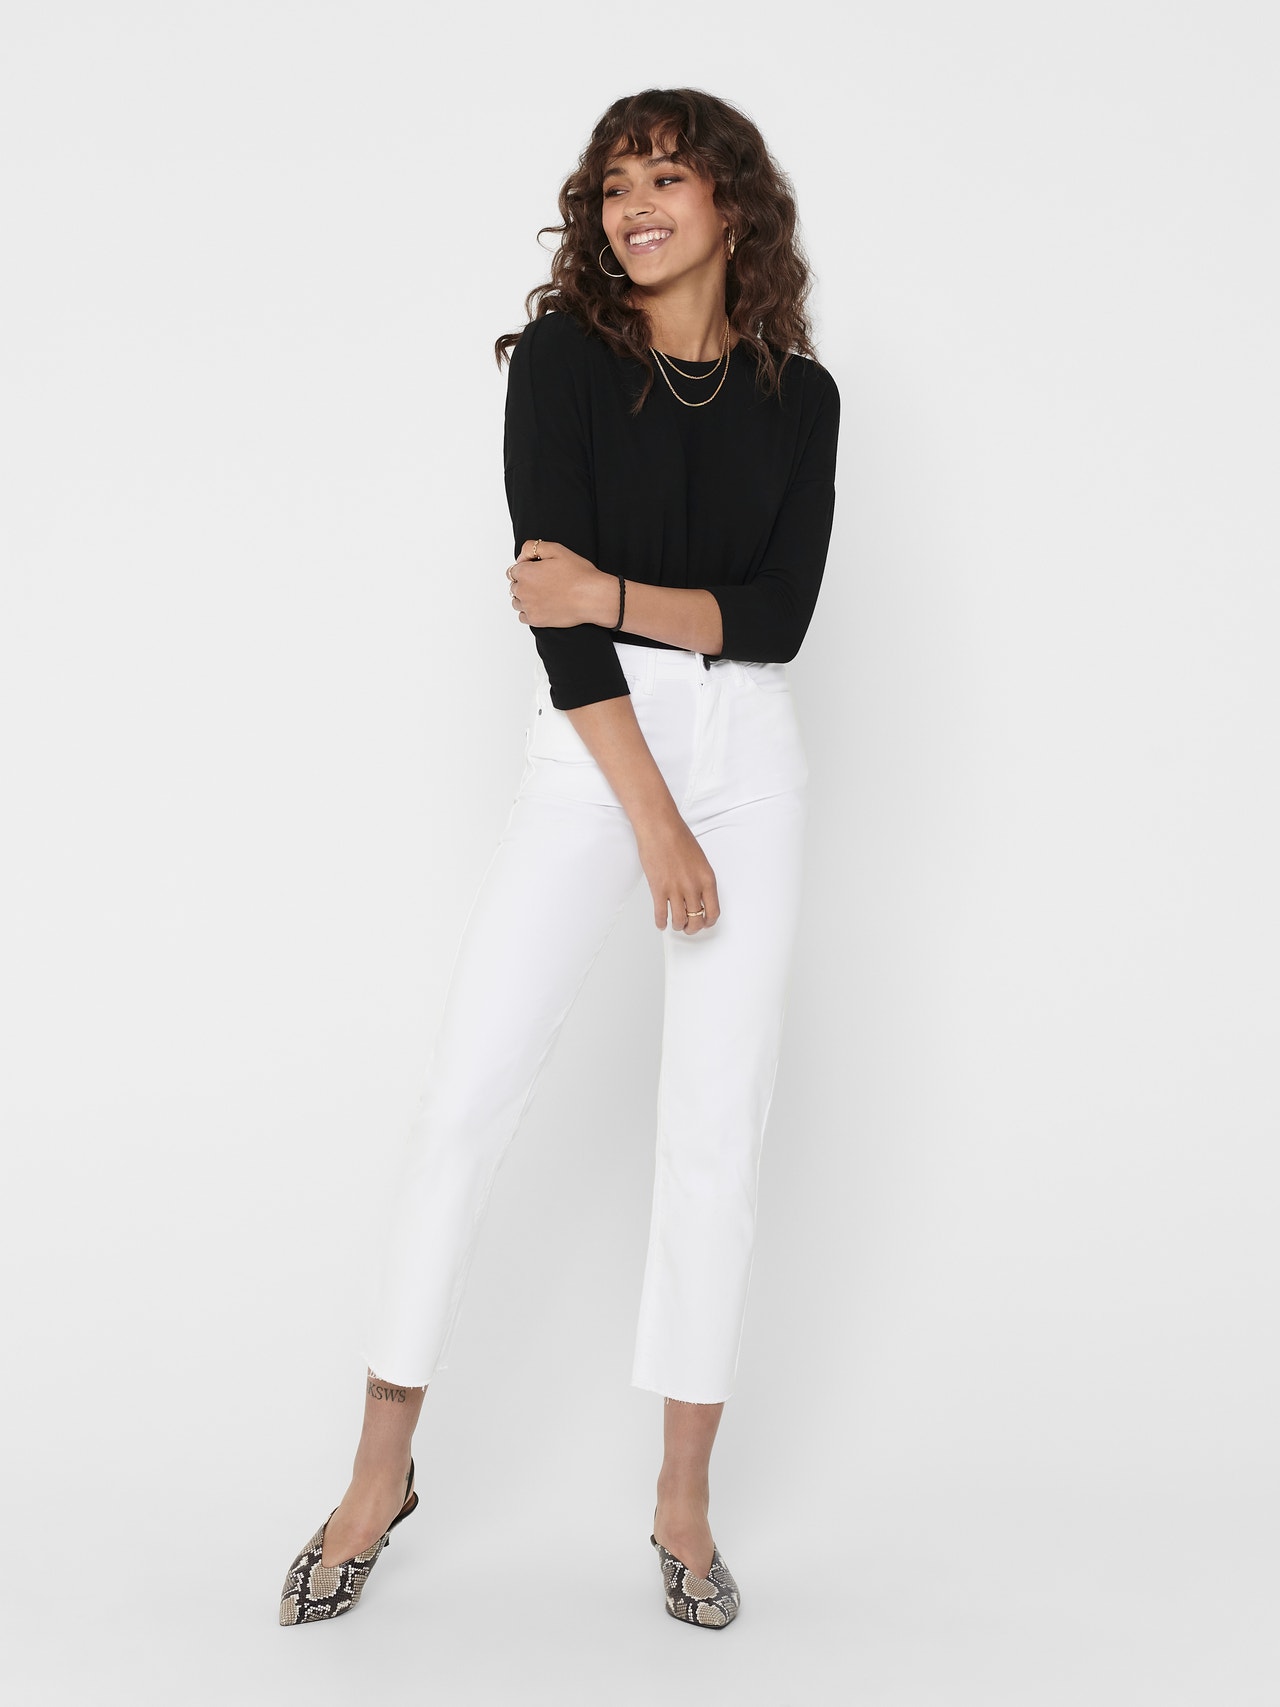 ONLY Loose fitted top -Black - 15157920